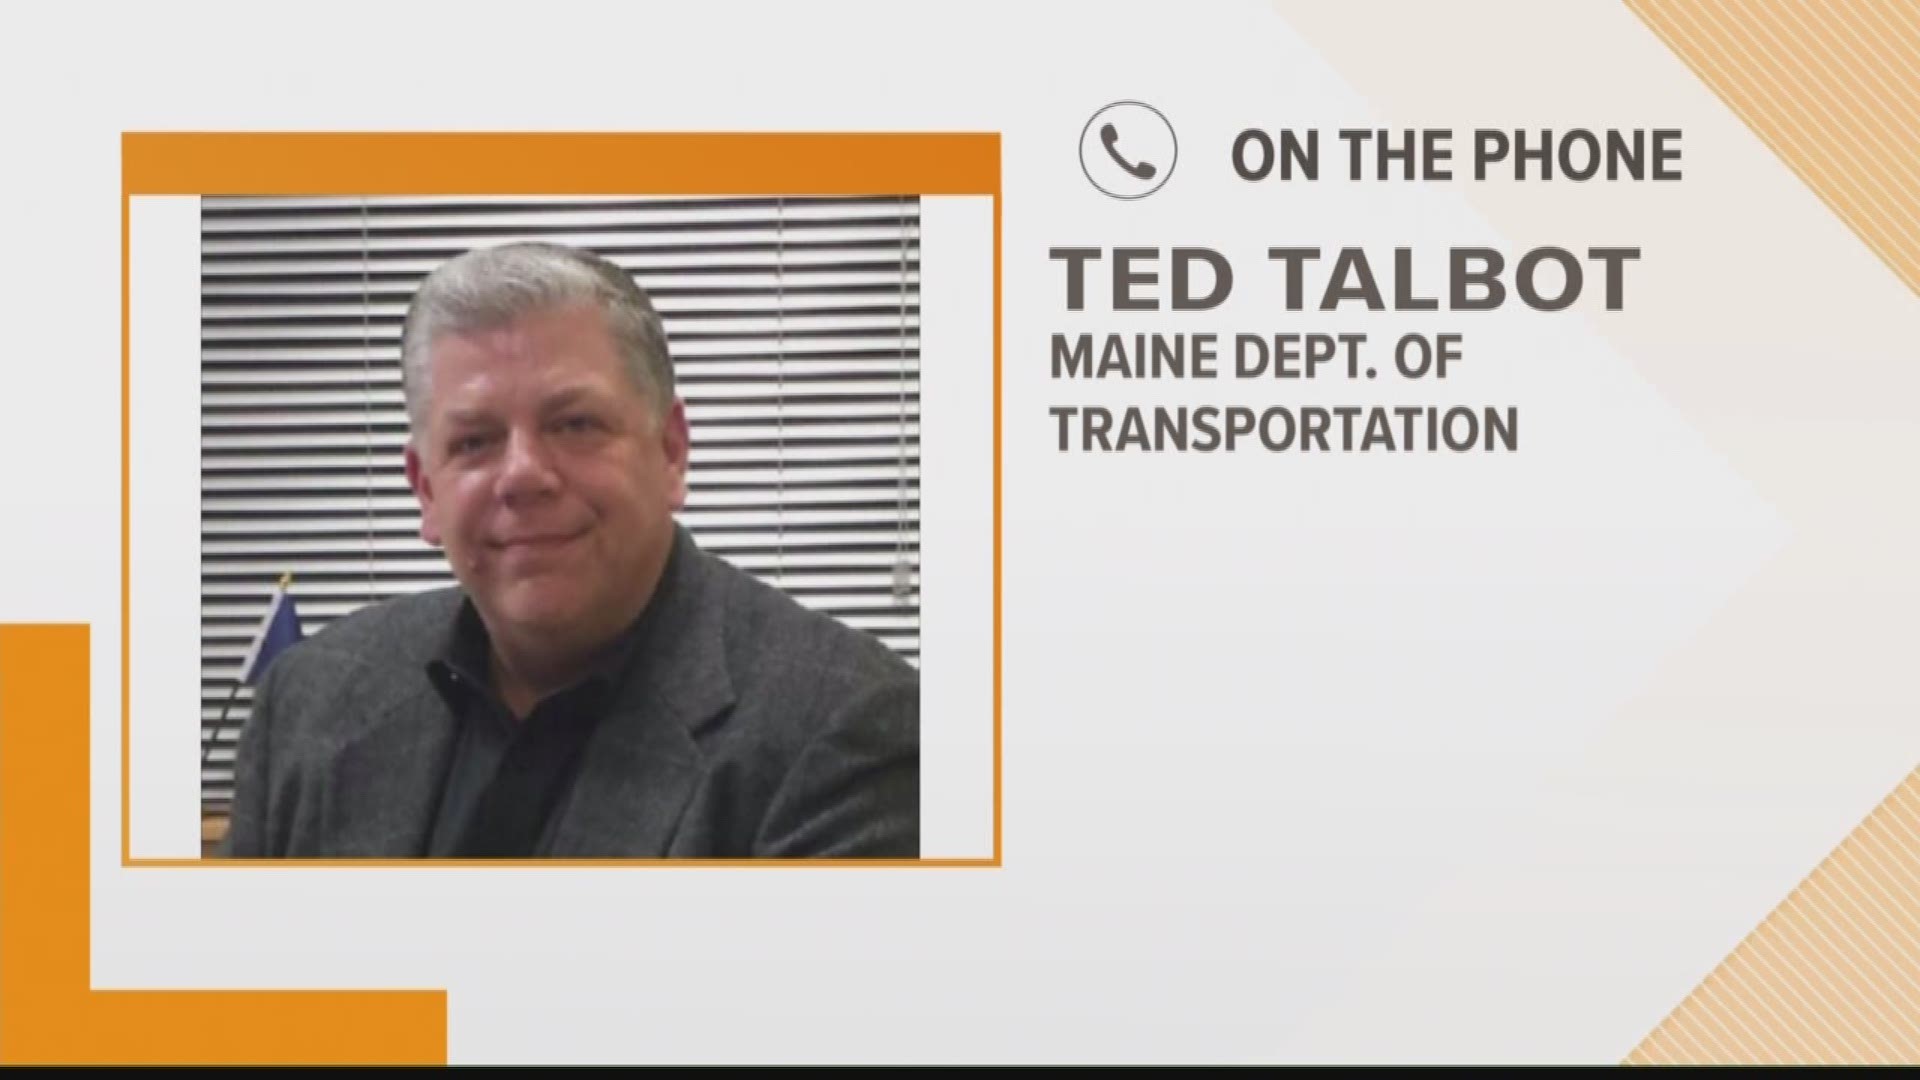 This morning Zach talked about Maine road conditions with MEDOT - Ted Talbot